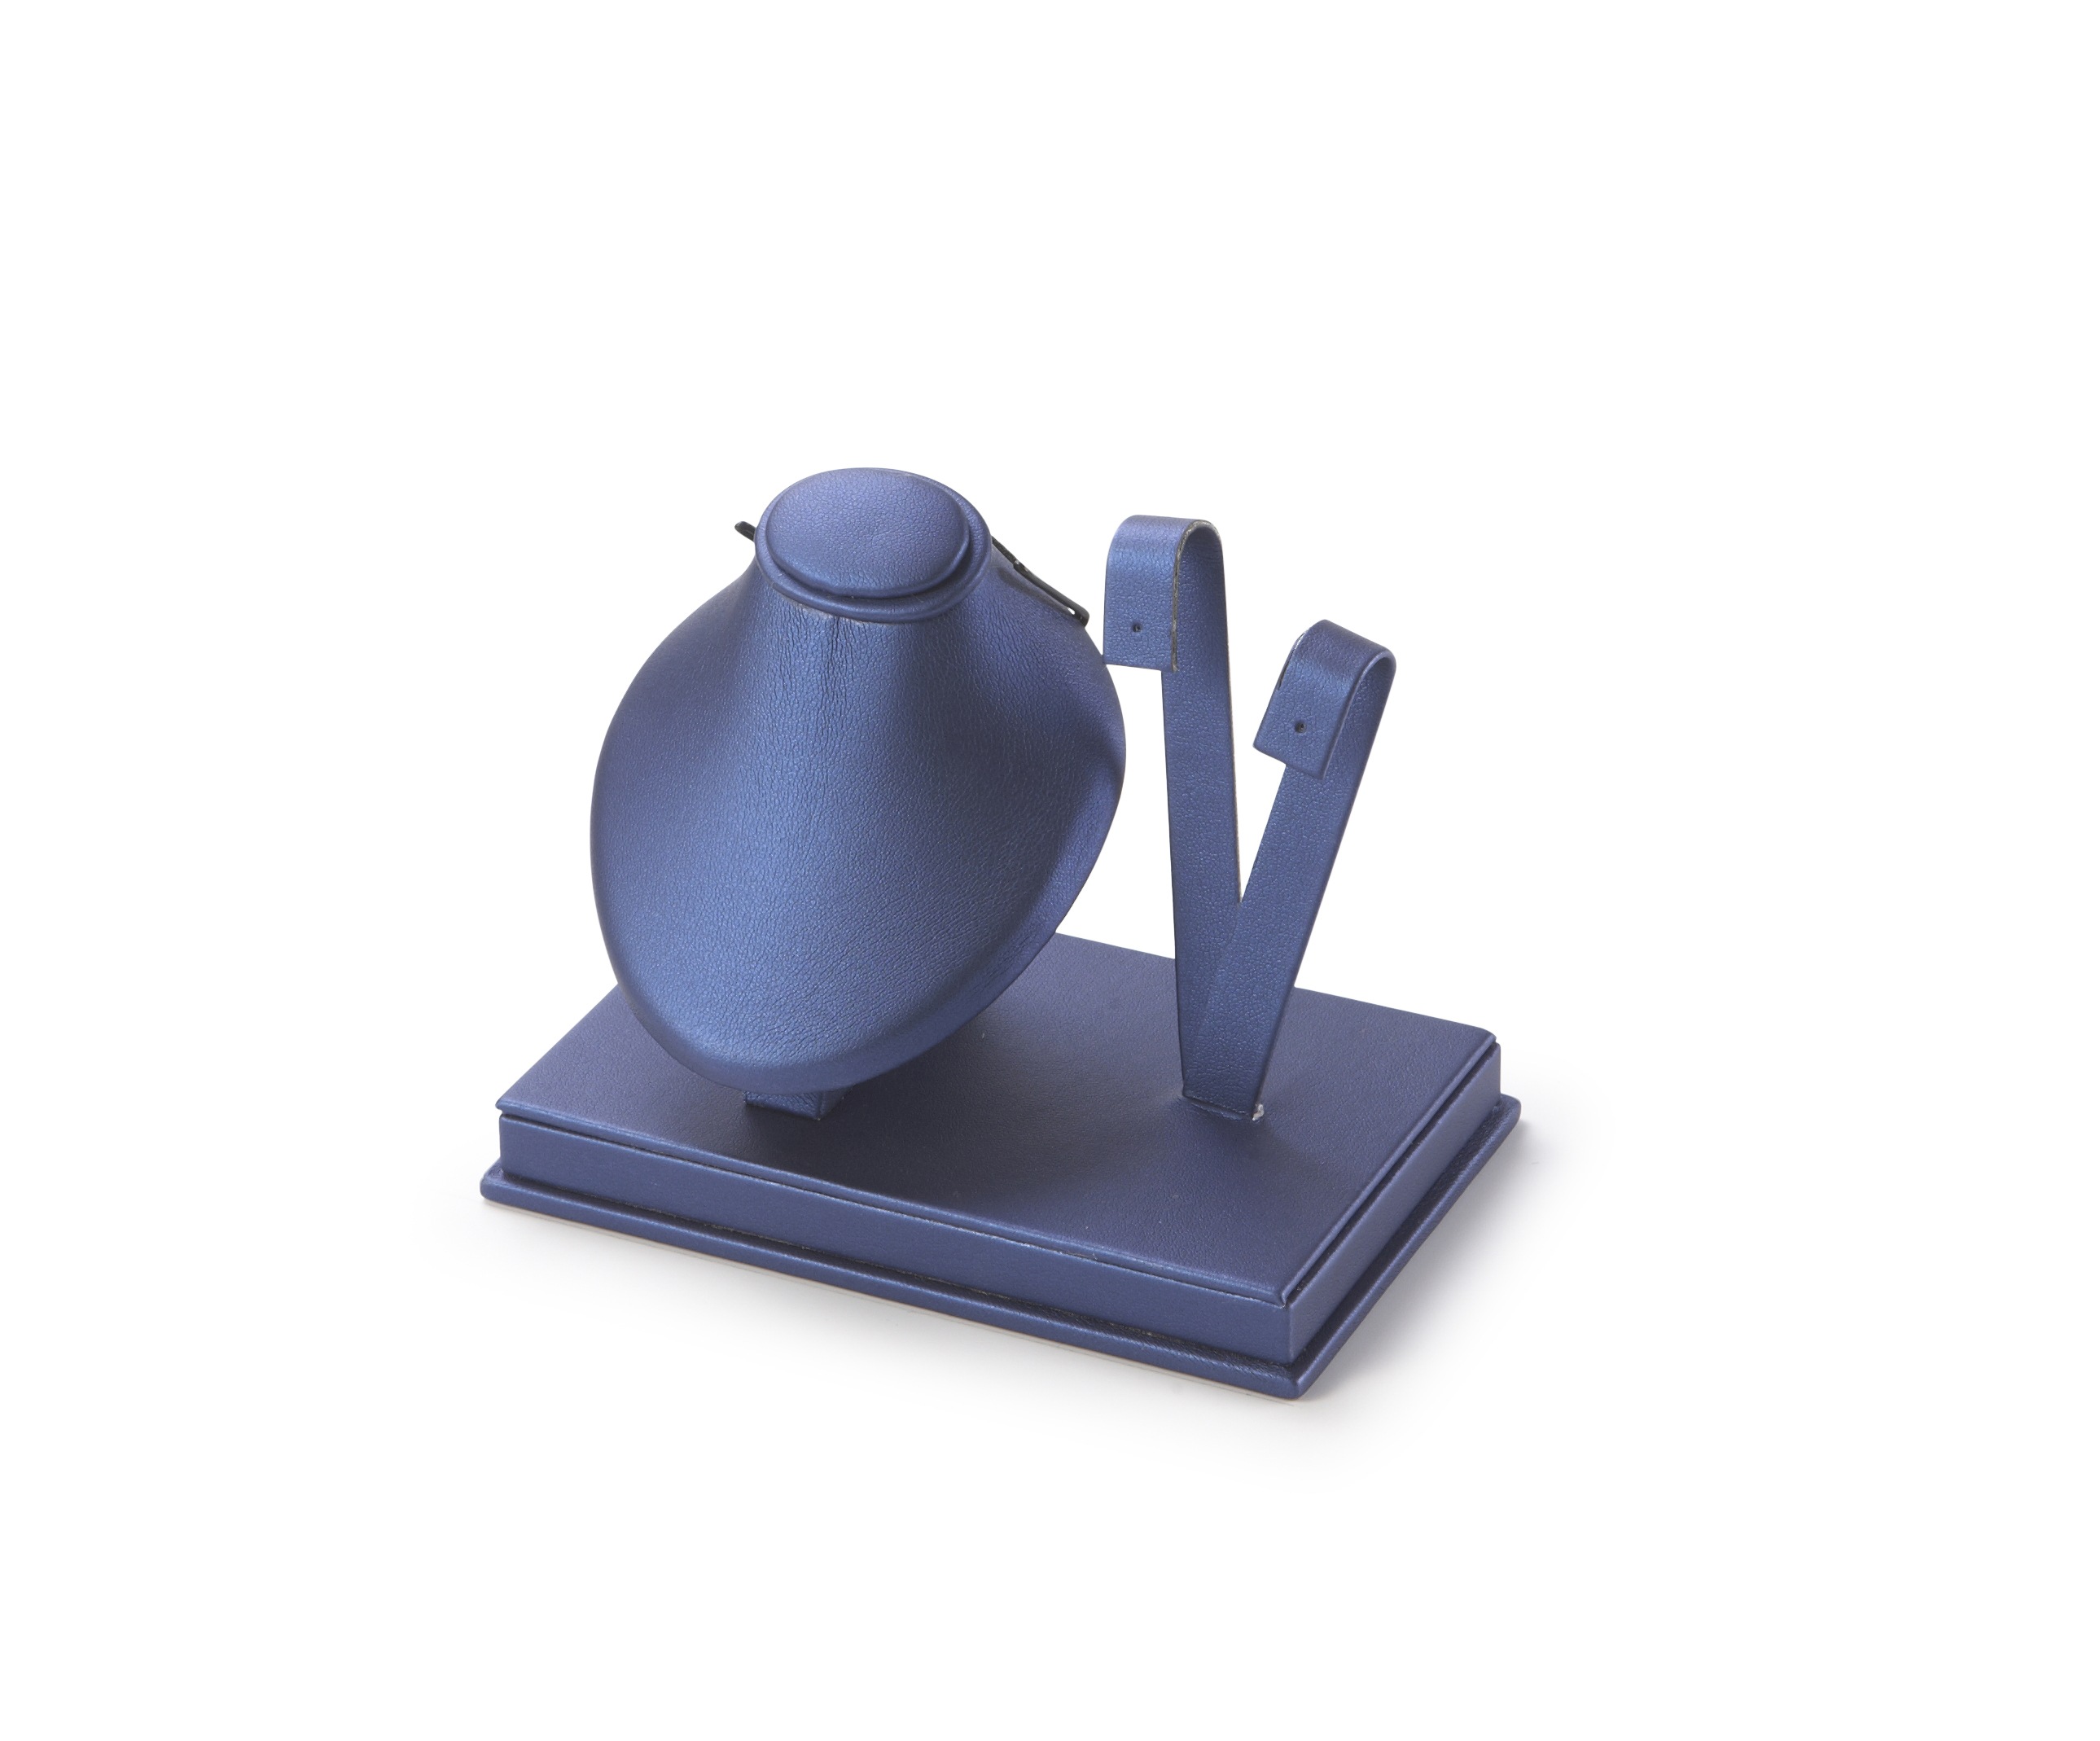 Navy Blue Leatherette Earring/Pendant Stand